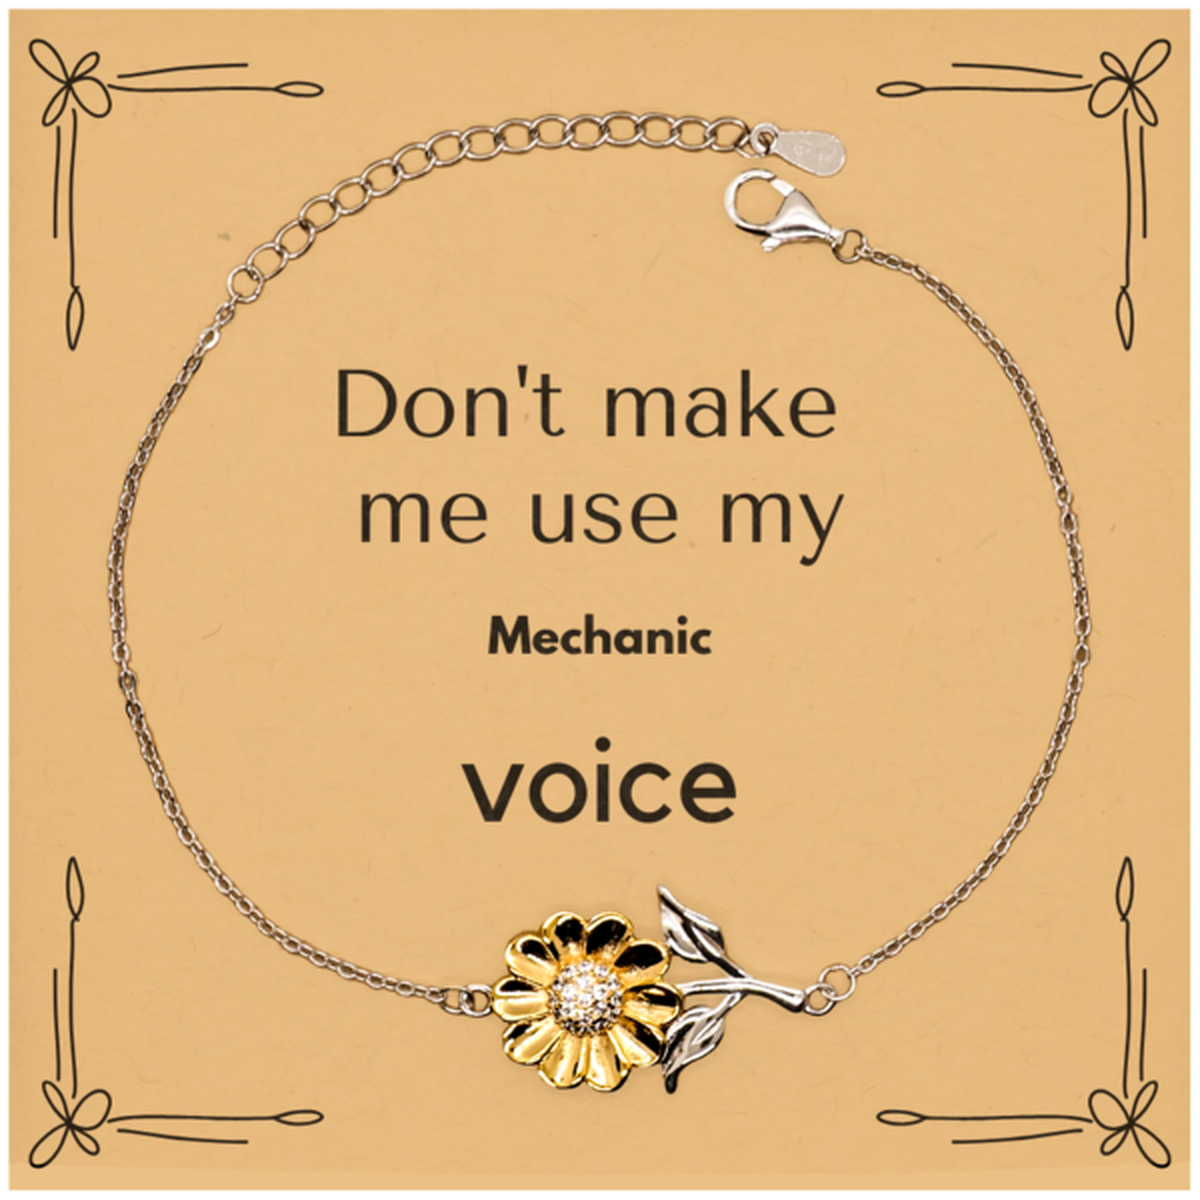 Don't make me use my Mechanic voice, Sarcasm Mechanic Card Gifts, Christmas Mechanic Sunflower Bracelet Birthday Unique Gifts For Mechanic Coworkers, Men, Women, Colleague, Friends